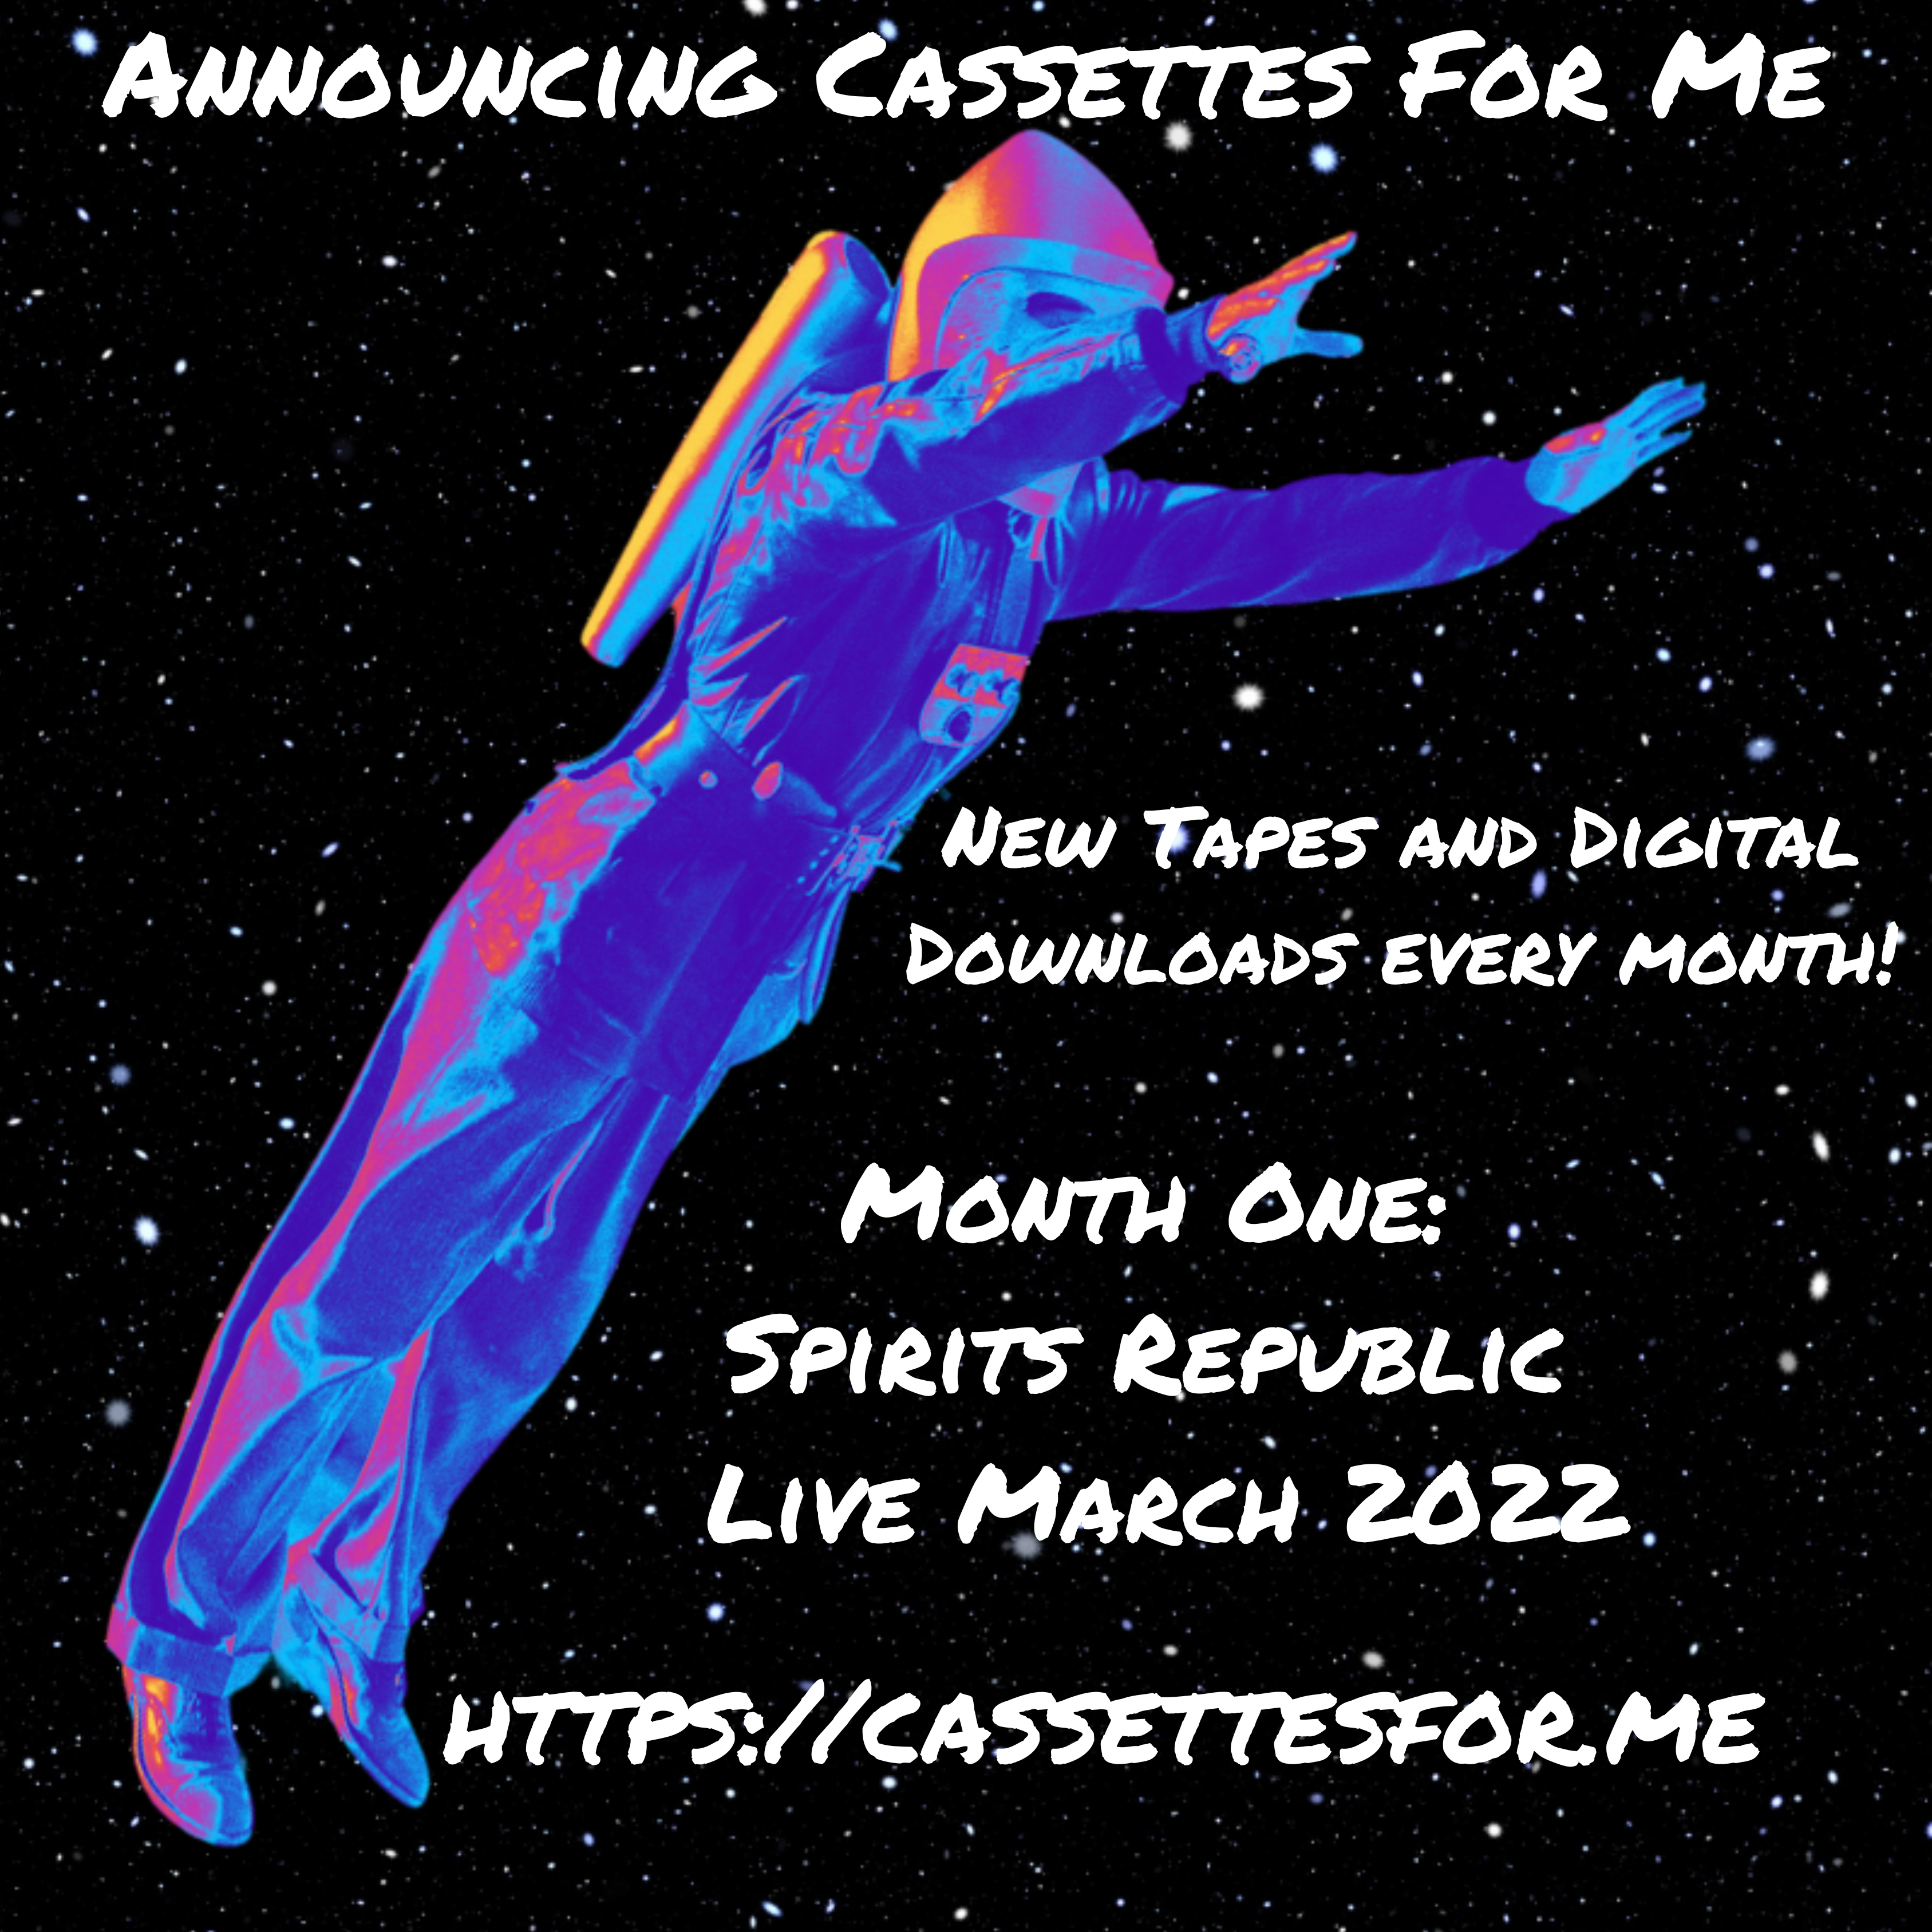 Announcing Cassettes For Me New Tapes and Digital Downloads every month! Month One Spirits Republic Live March 2022 httpscassettesfor.me.png